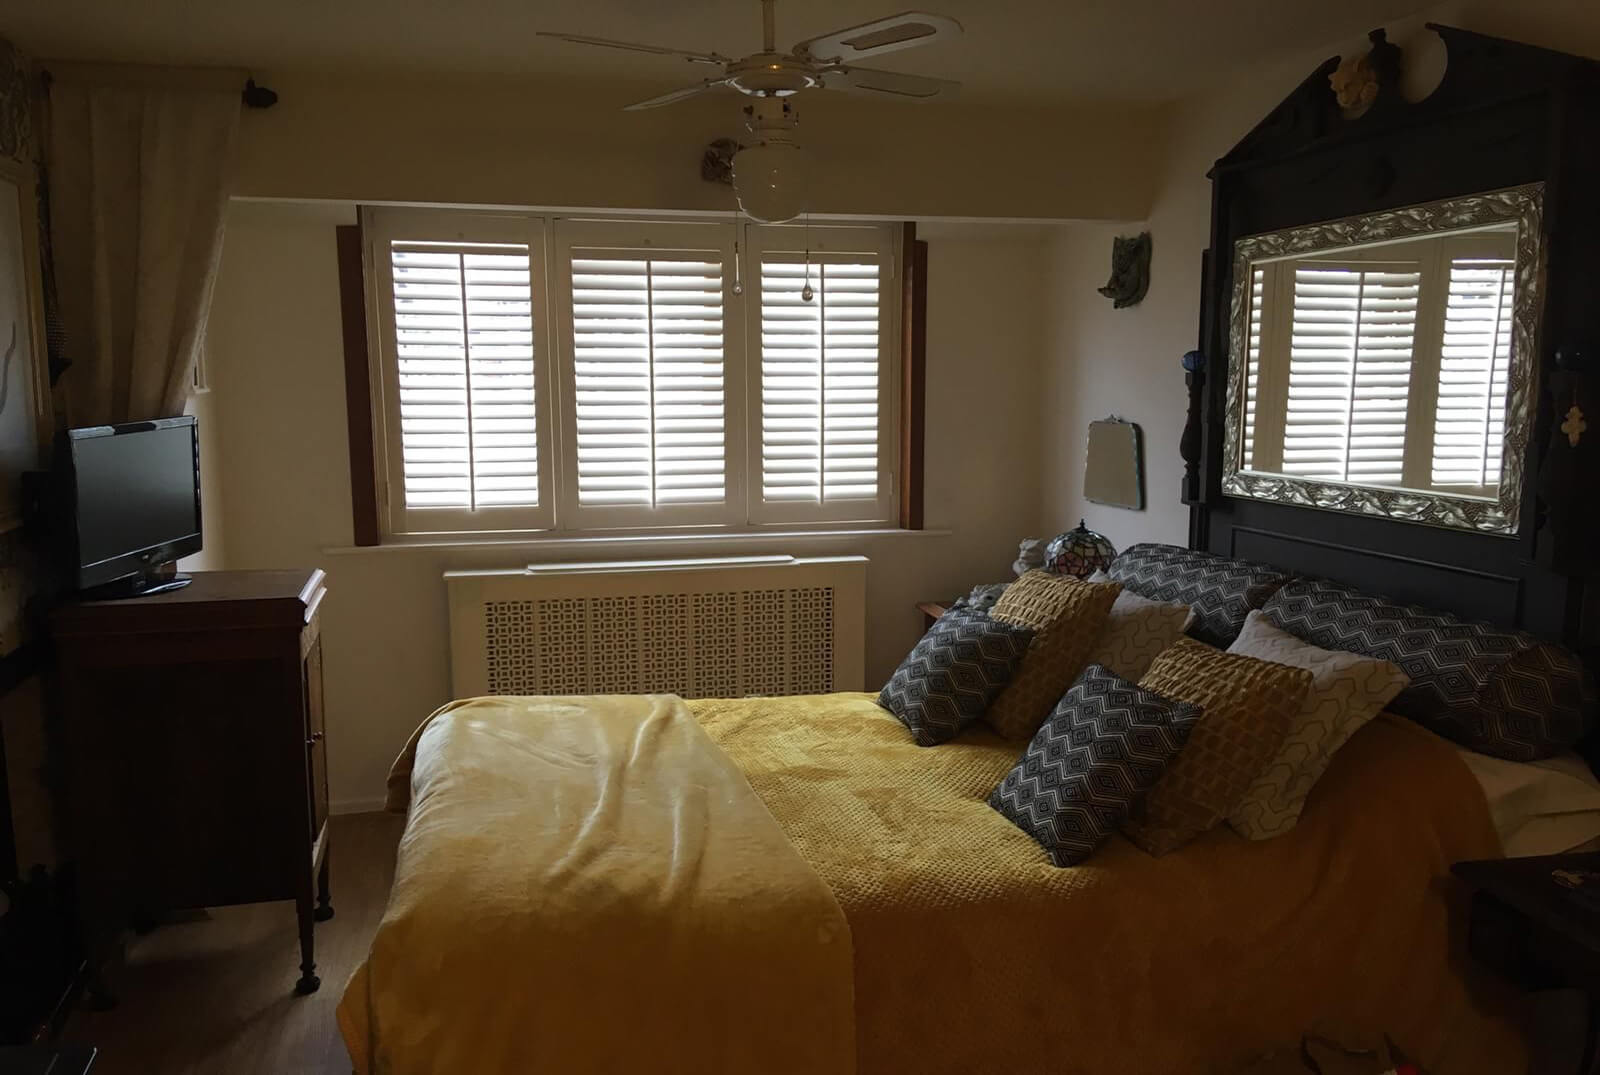 UK Suppliers of Plantation Shutters For Bay Windows